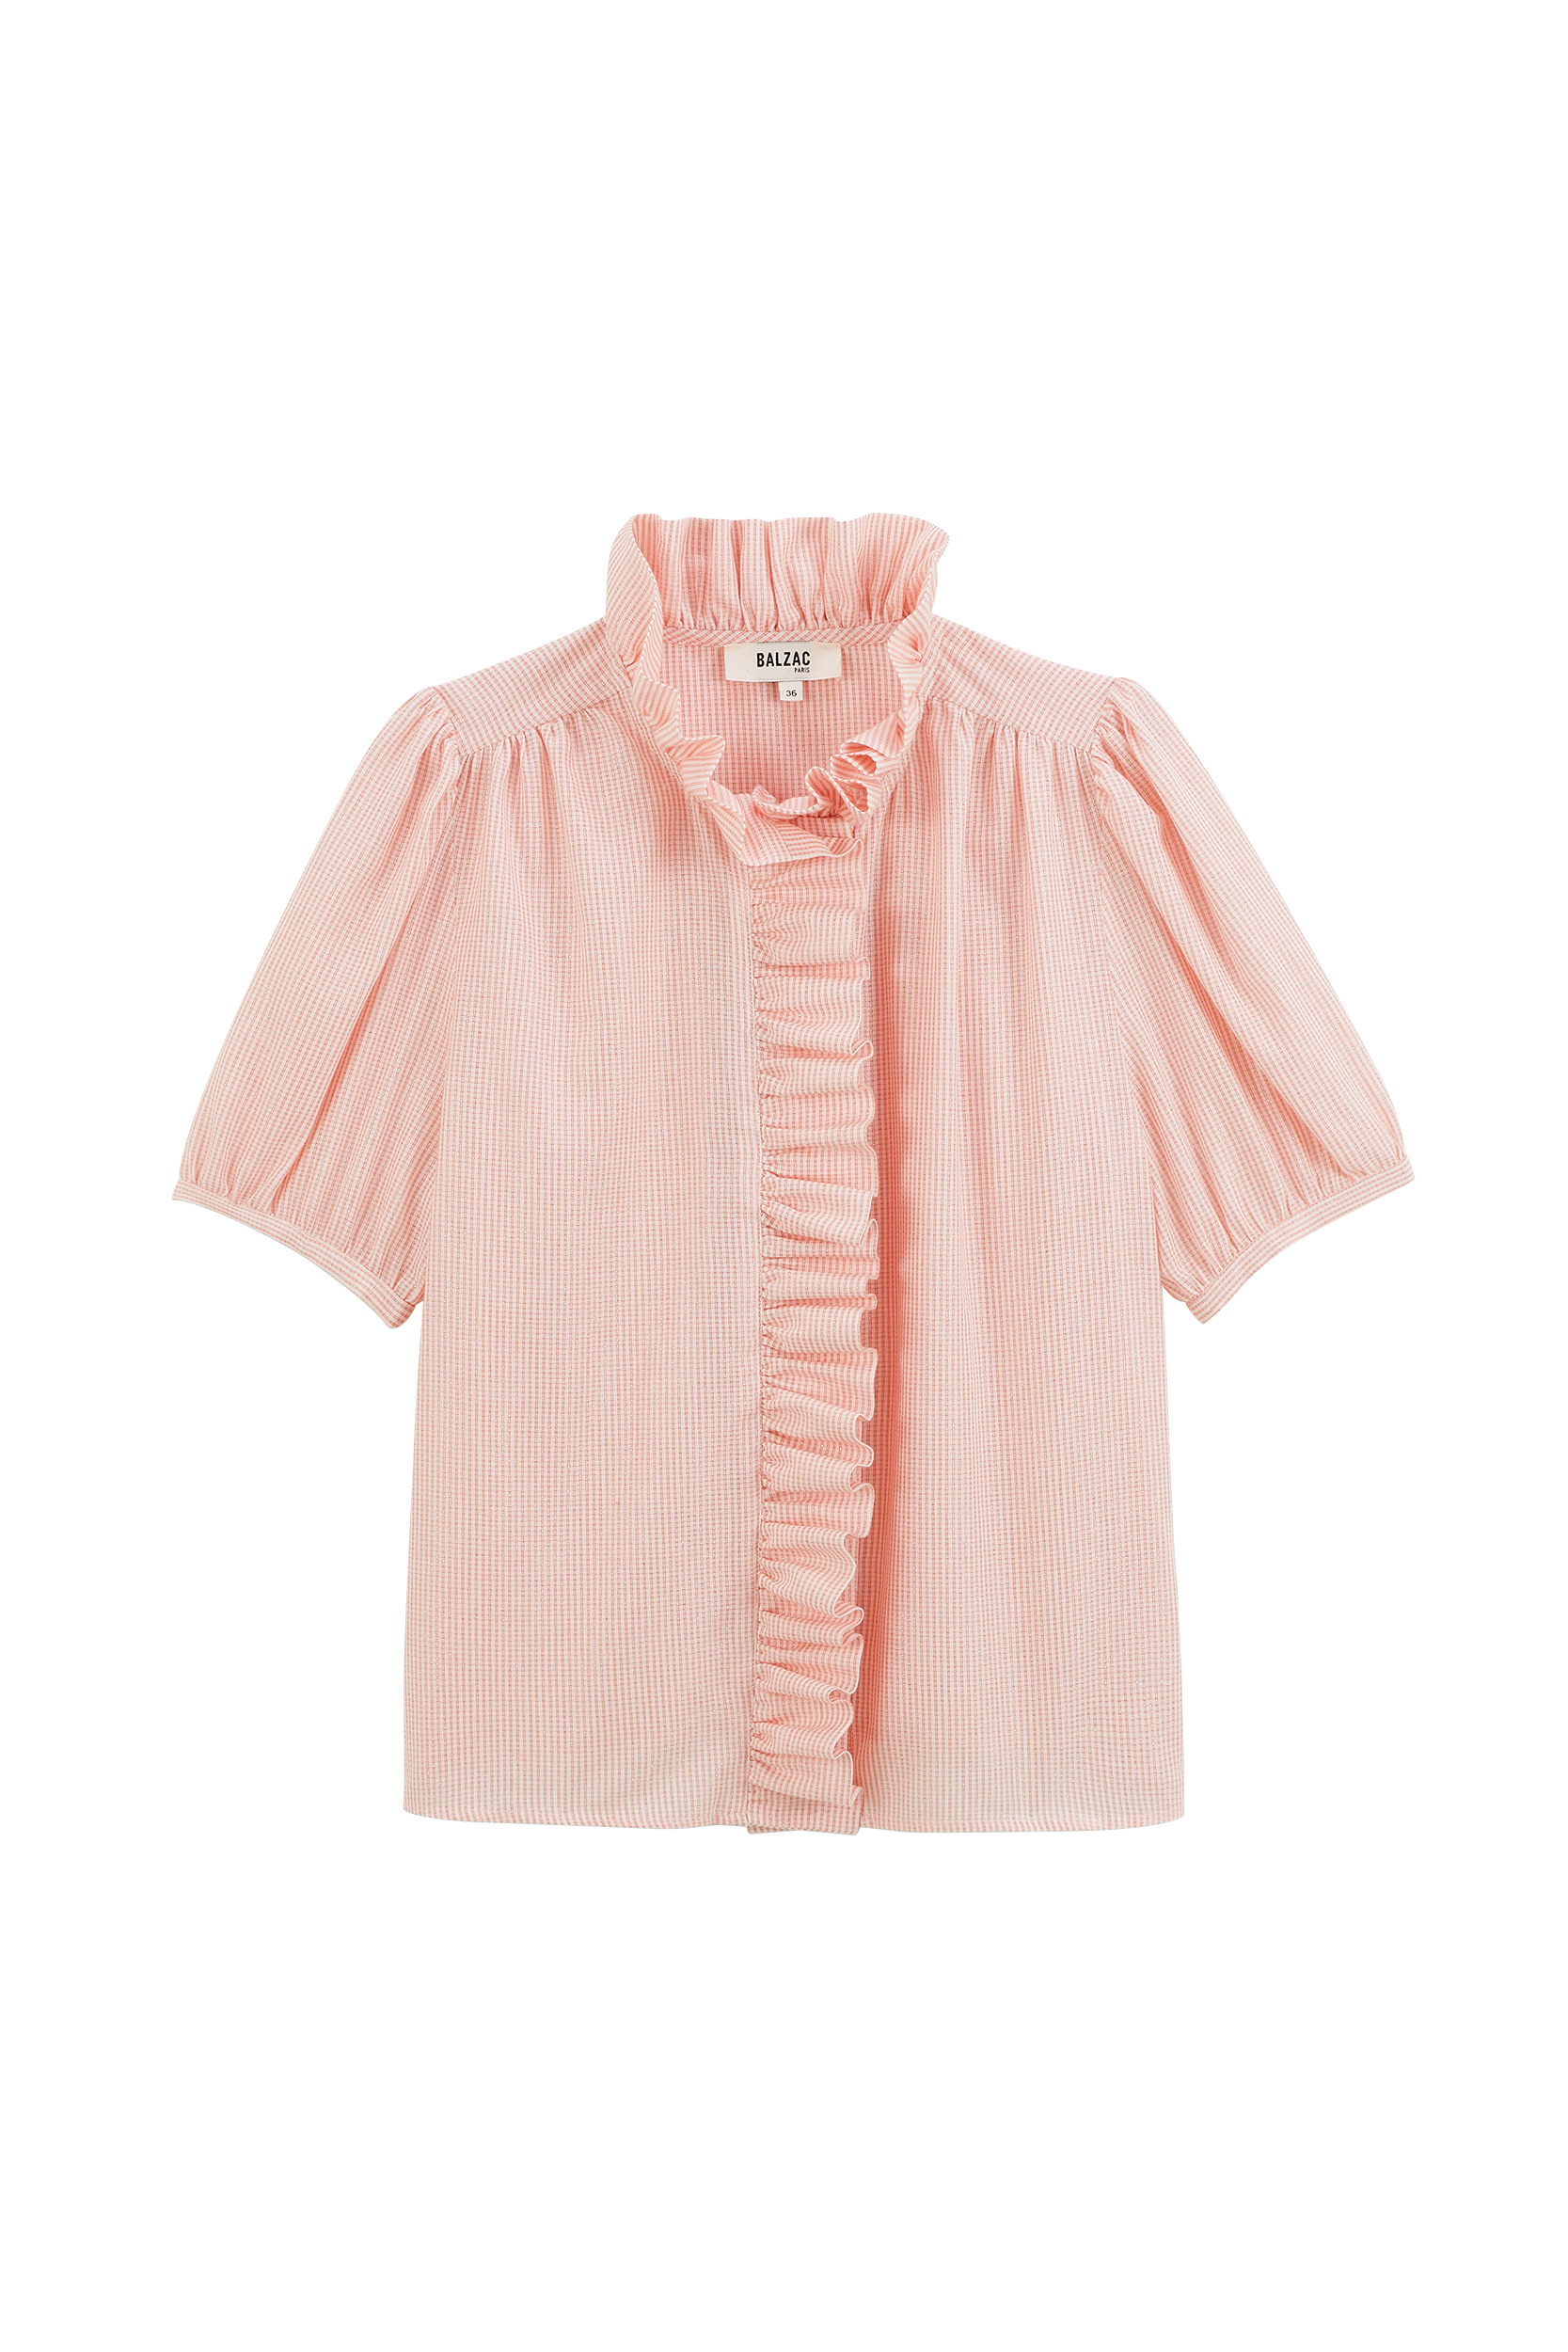 Iridescent coral striped bathing shirt